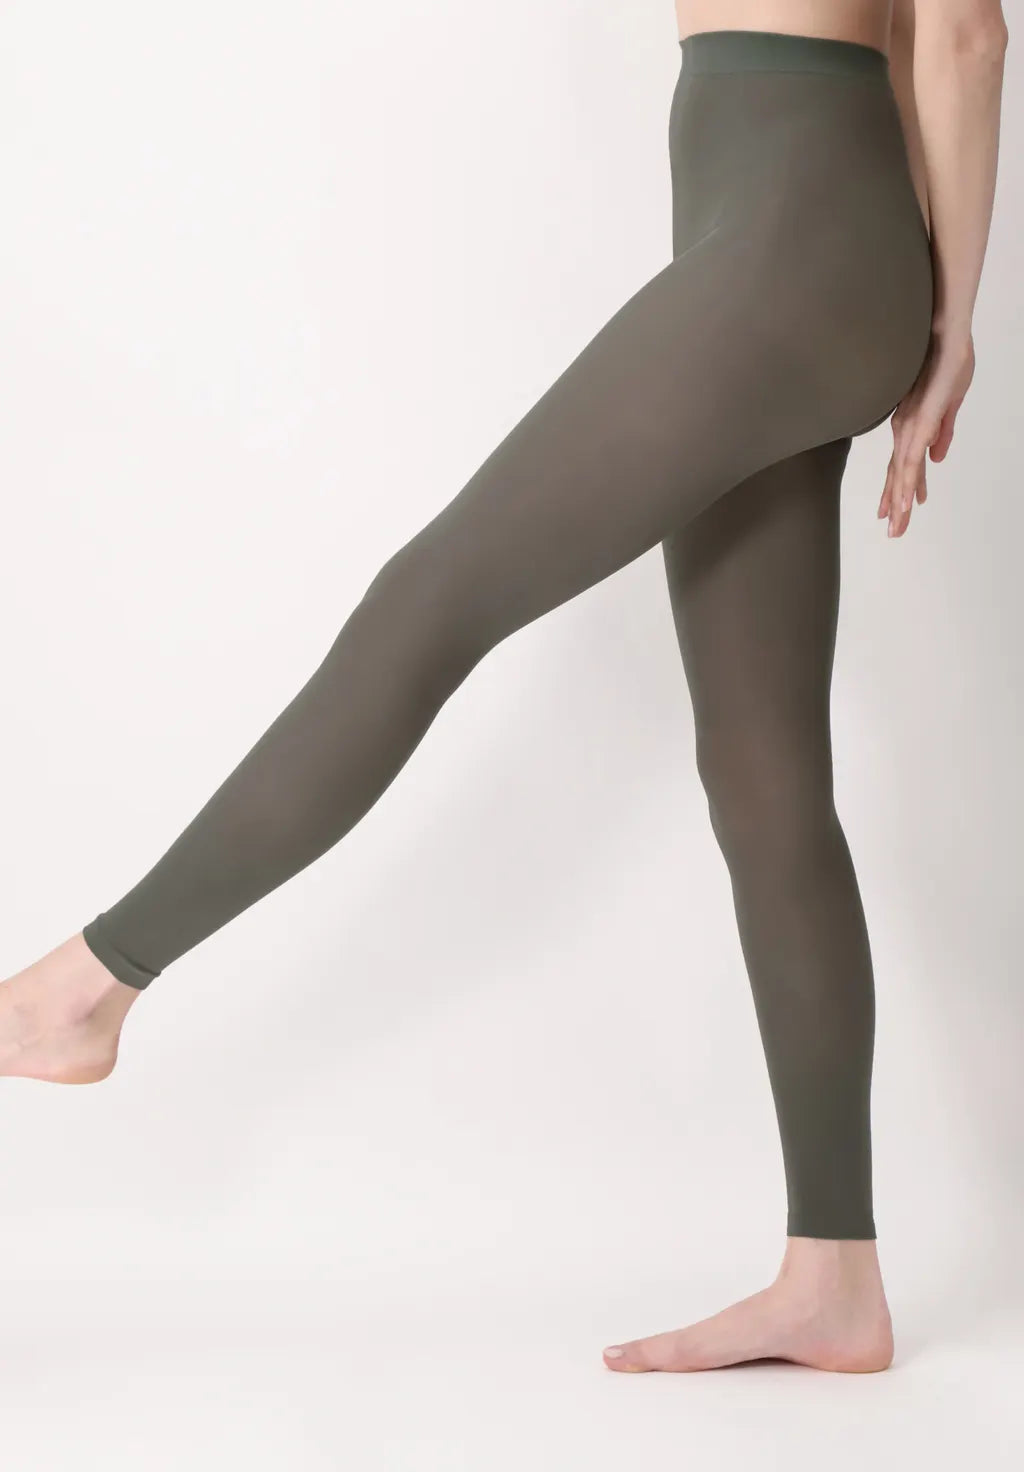 Oroblu All Colors Leggings - Military khaki green soft matte opaque footless tights with deep comfort waist band, flat seams and gusset.